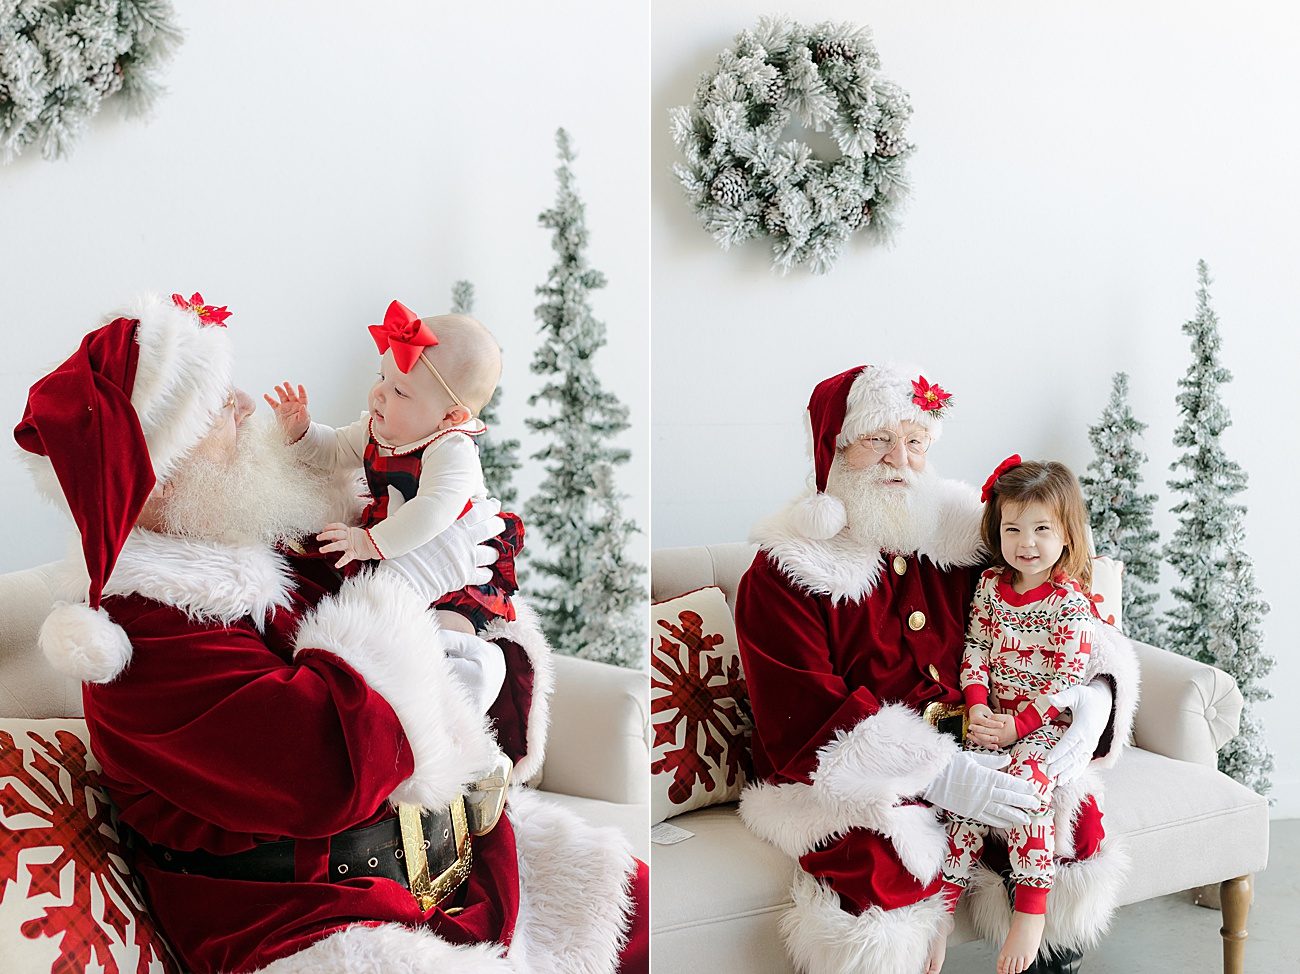 Baby reaching for Santa's beard and little girl smiling on his lap. Photos by Sana Ahmed Photography.